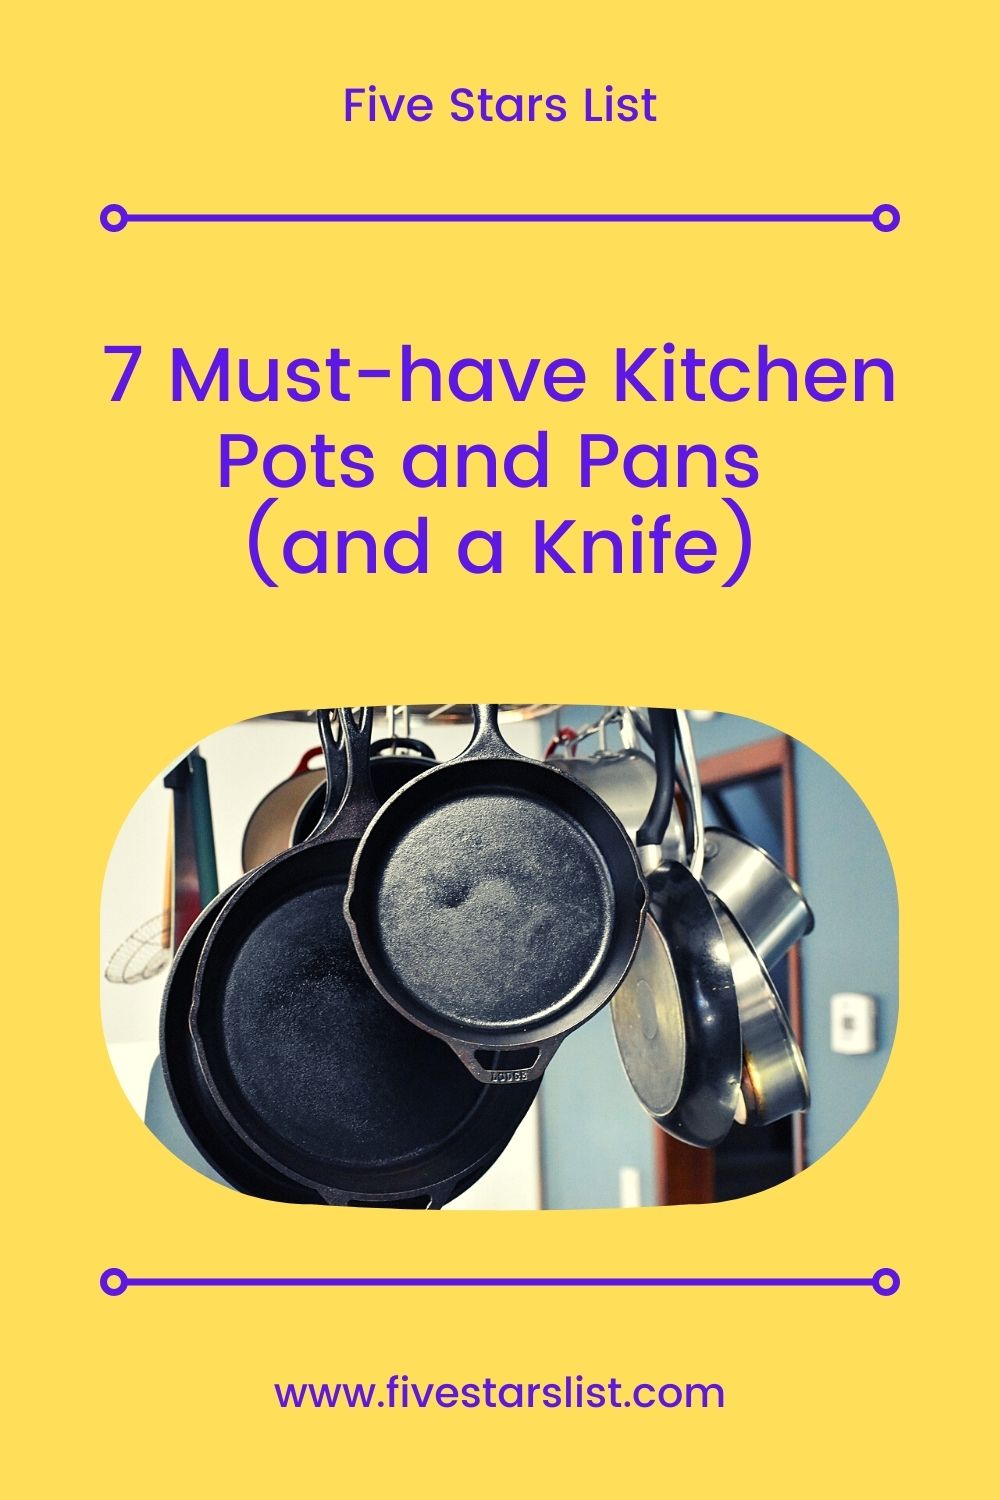 7 Must-have Kitchen Pots and Pans (and a Knife)